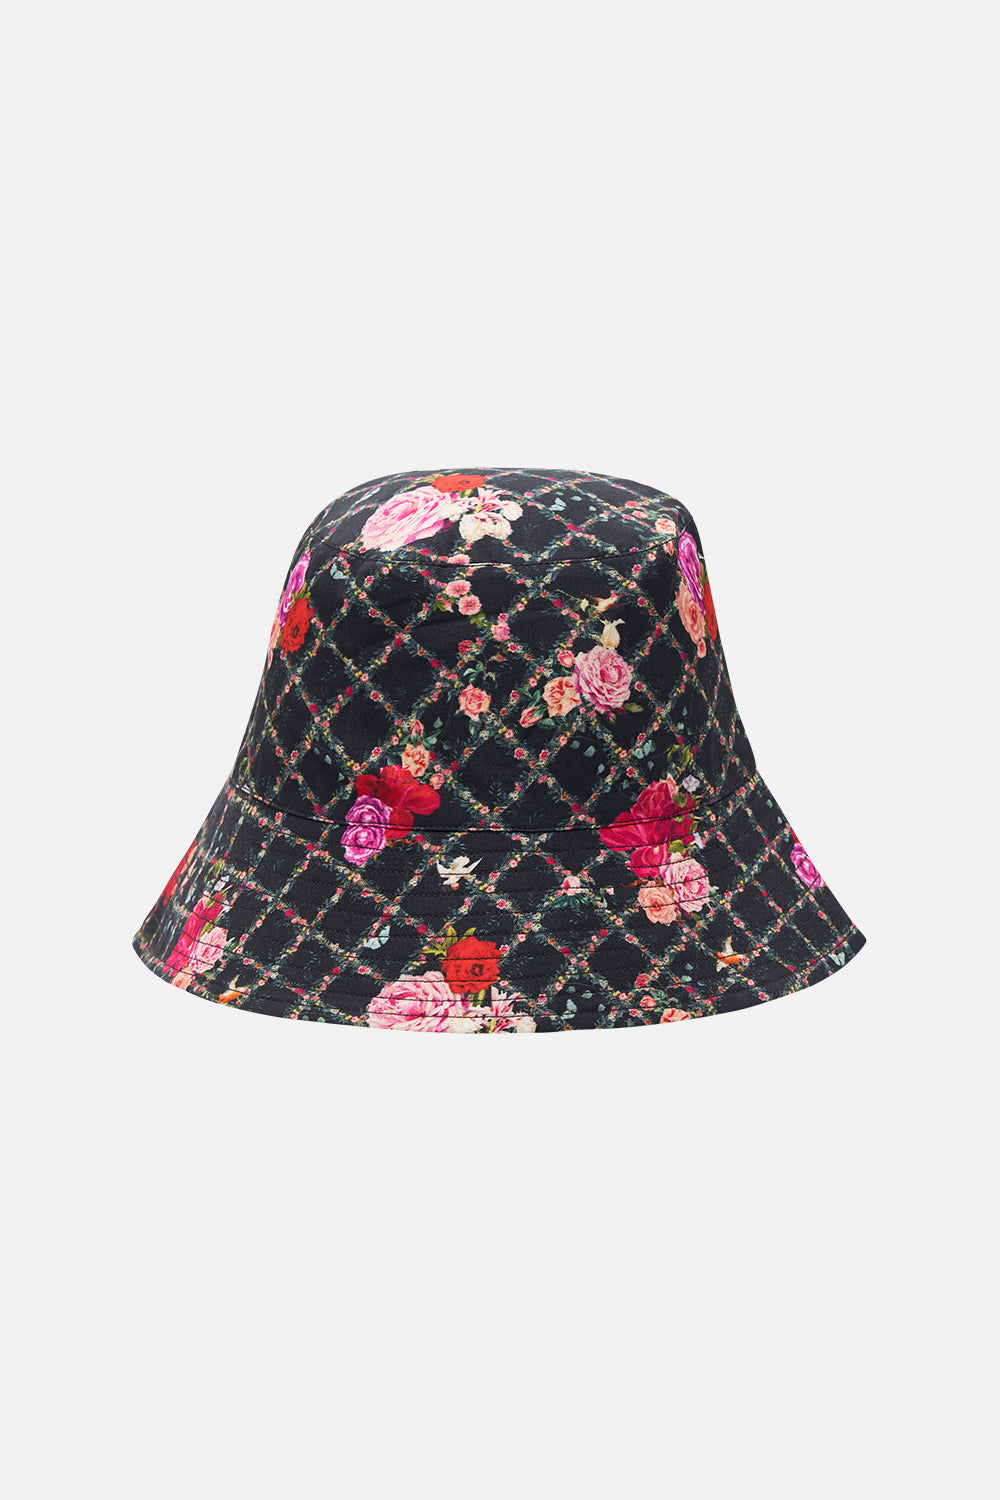 Product view of CAMILLA reversible bucket hat in Reservation For Love print 